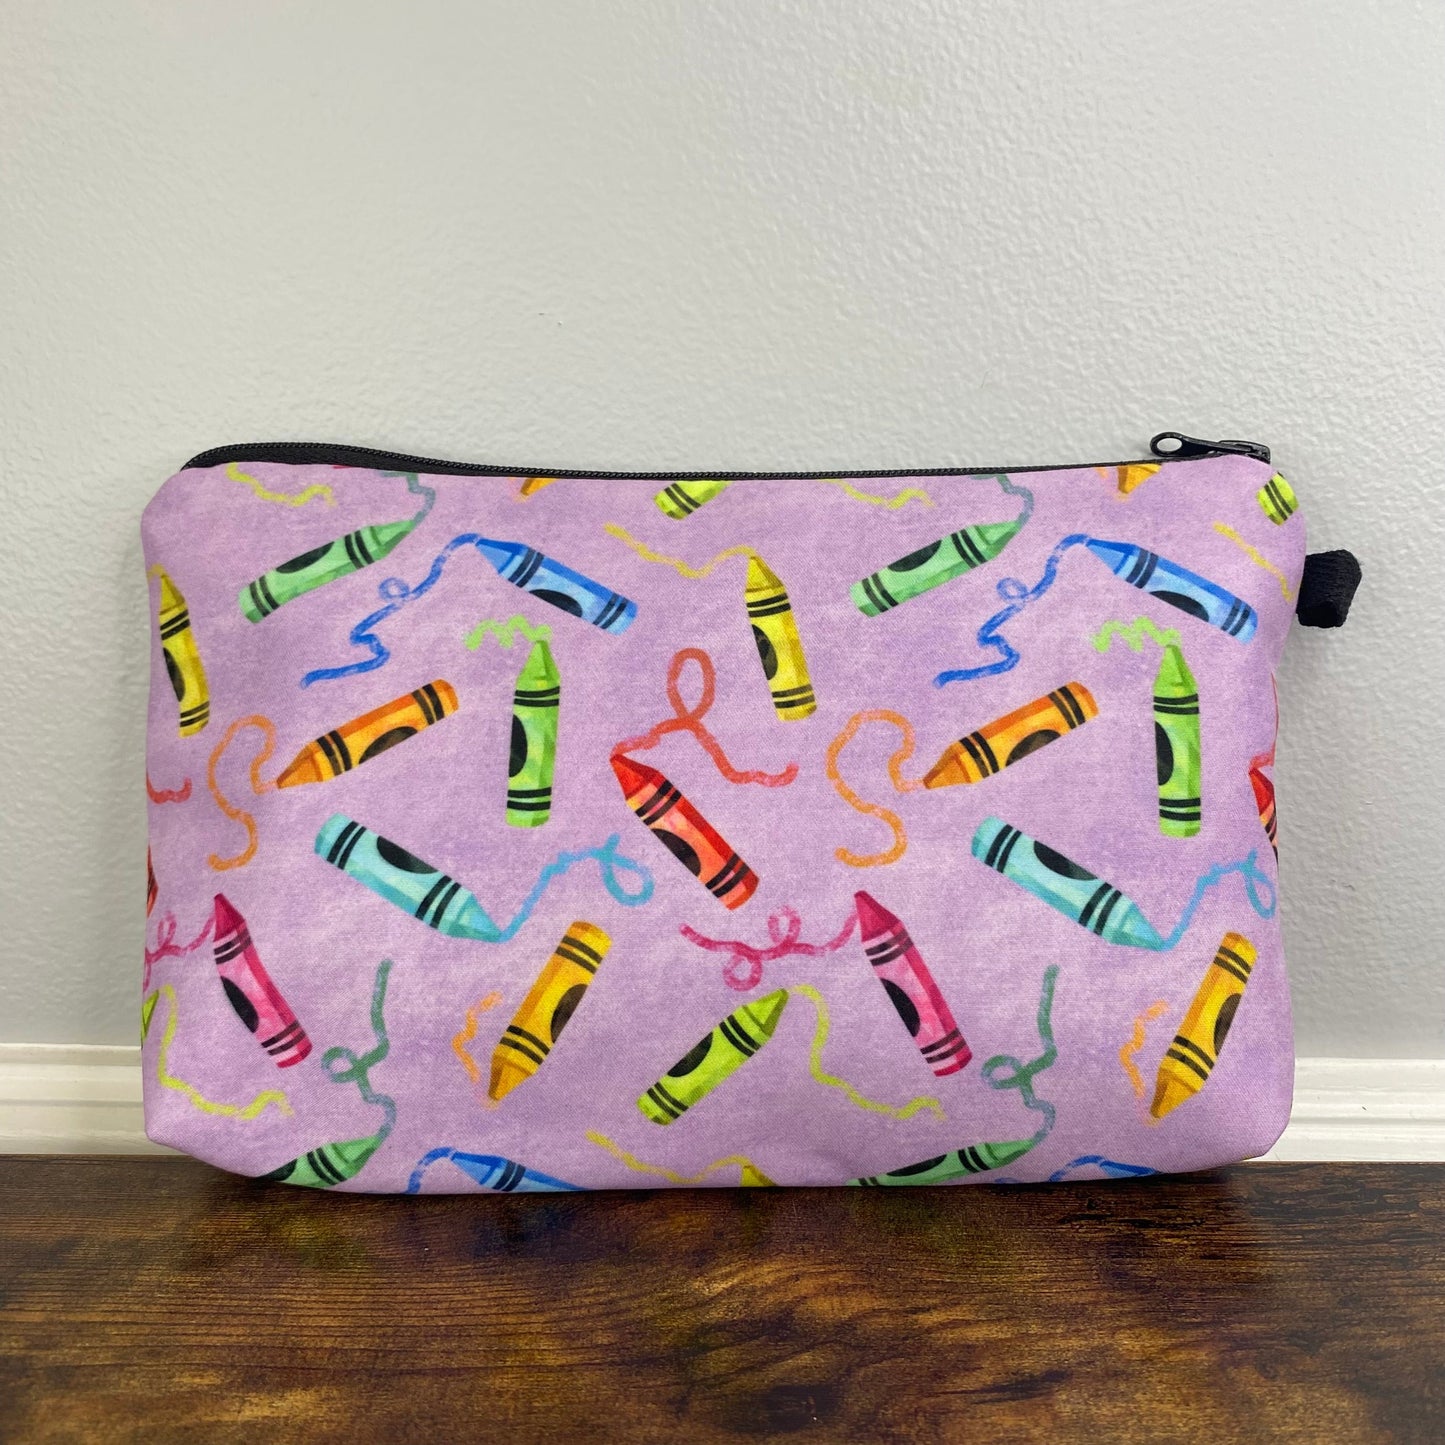 Crayons Purple - Water-Resistant Multi-Use Pouch